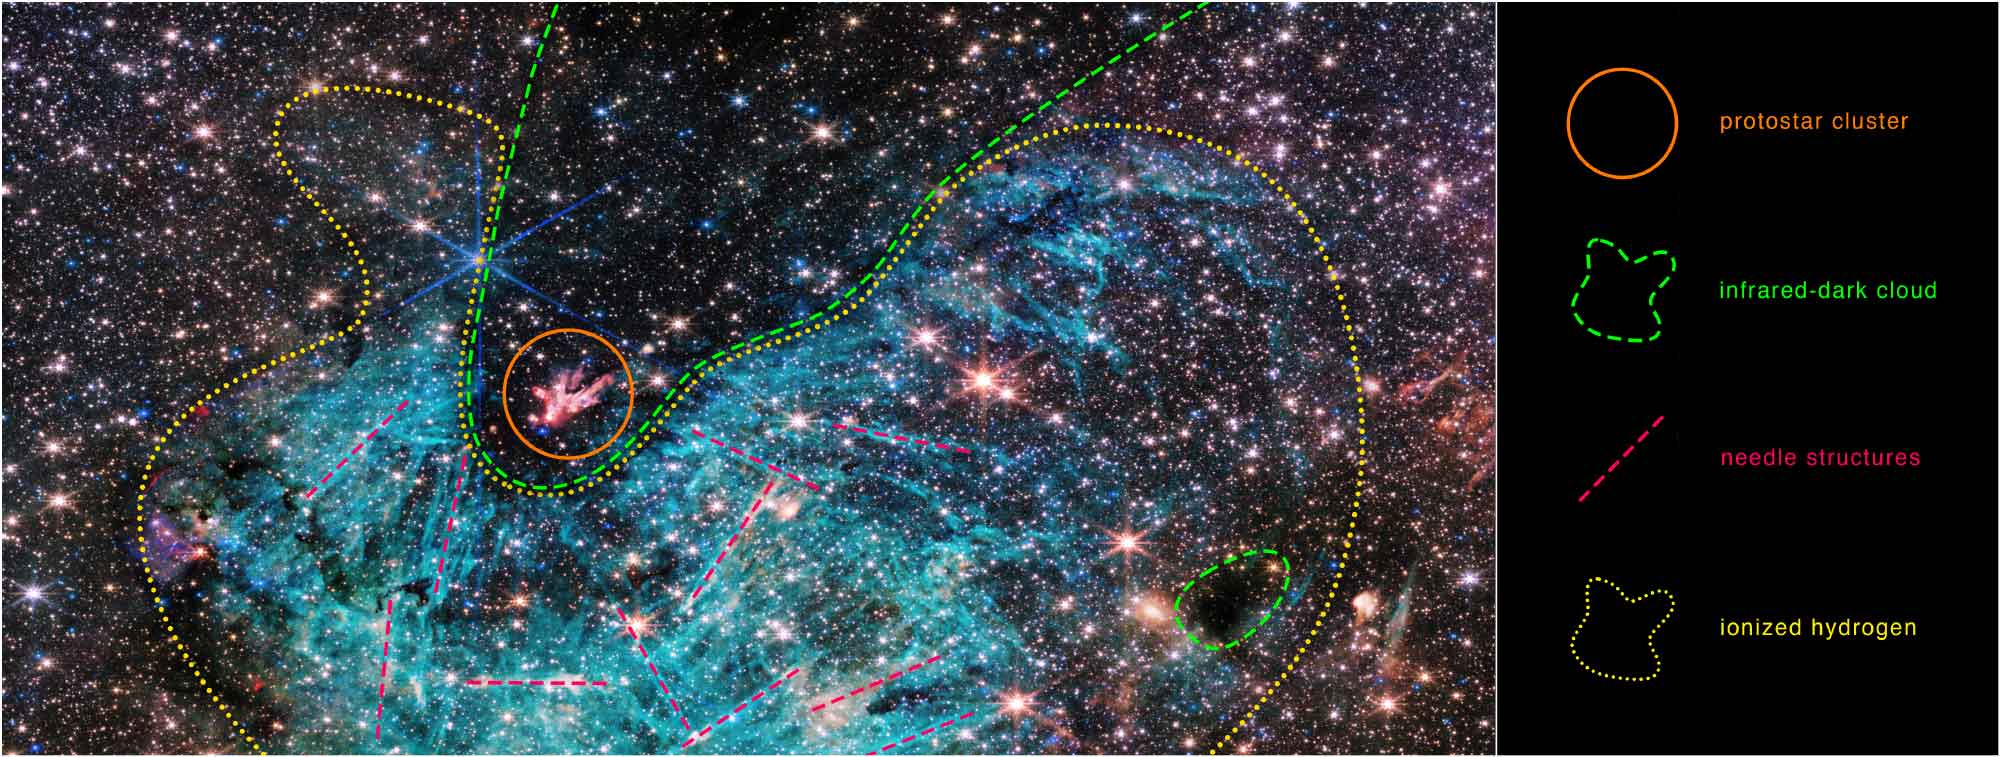 Approximate outlines help to define the features in the Sagittarius C (Sgr C) region. Astronomers are studying data from NASA’s James Webb Space Telescope to understand the relationship between these features, as well as other influences in the chaotic galaxy center. Credits: NASA, ESA, CSA, STScI, Samuel Crowe (UVA)